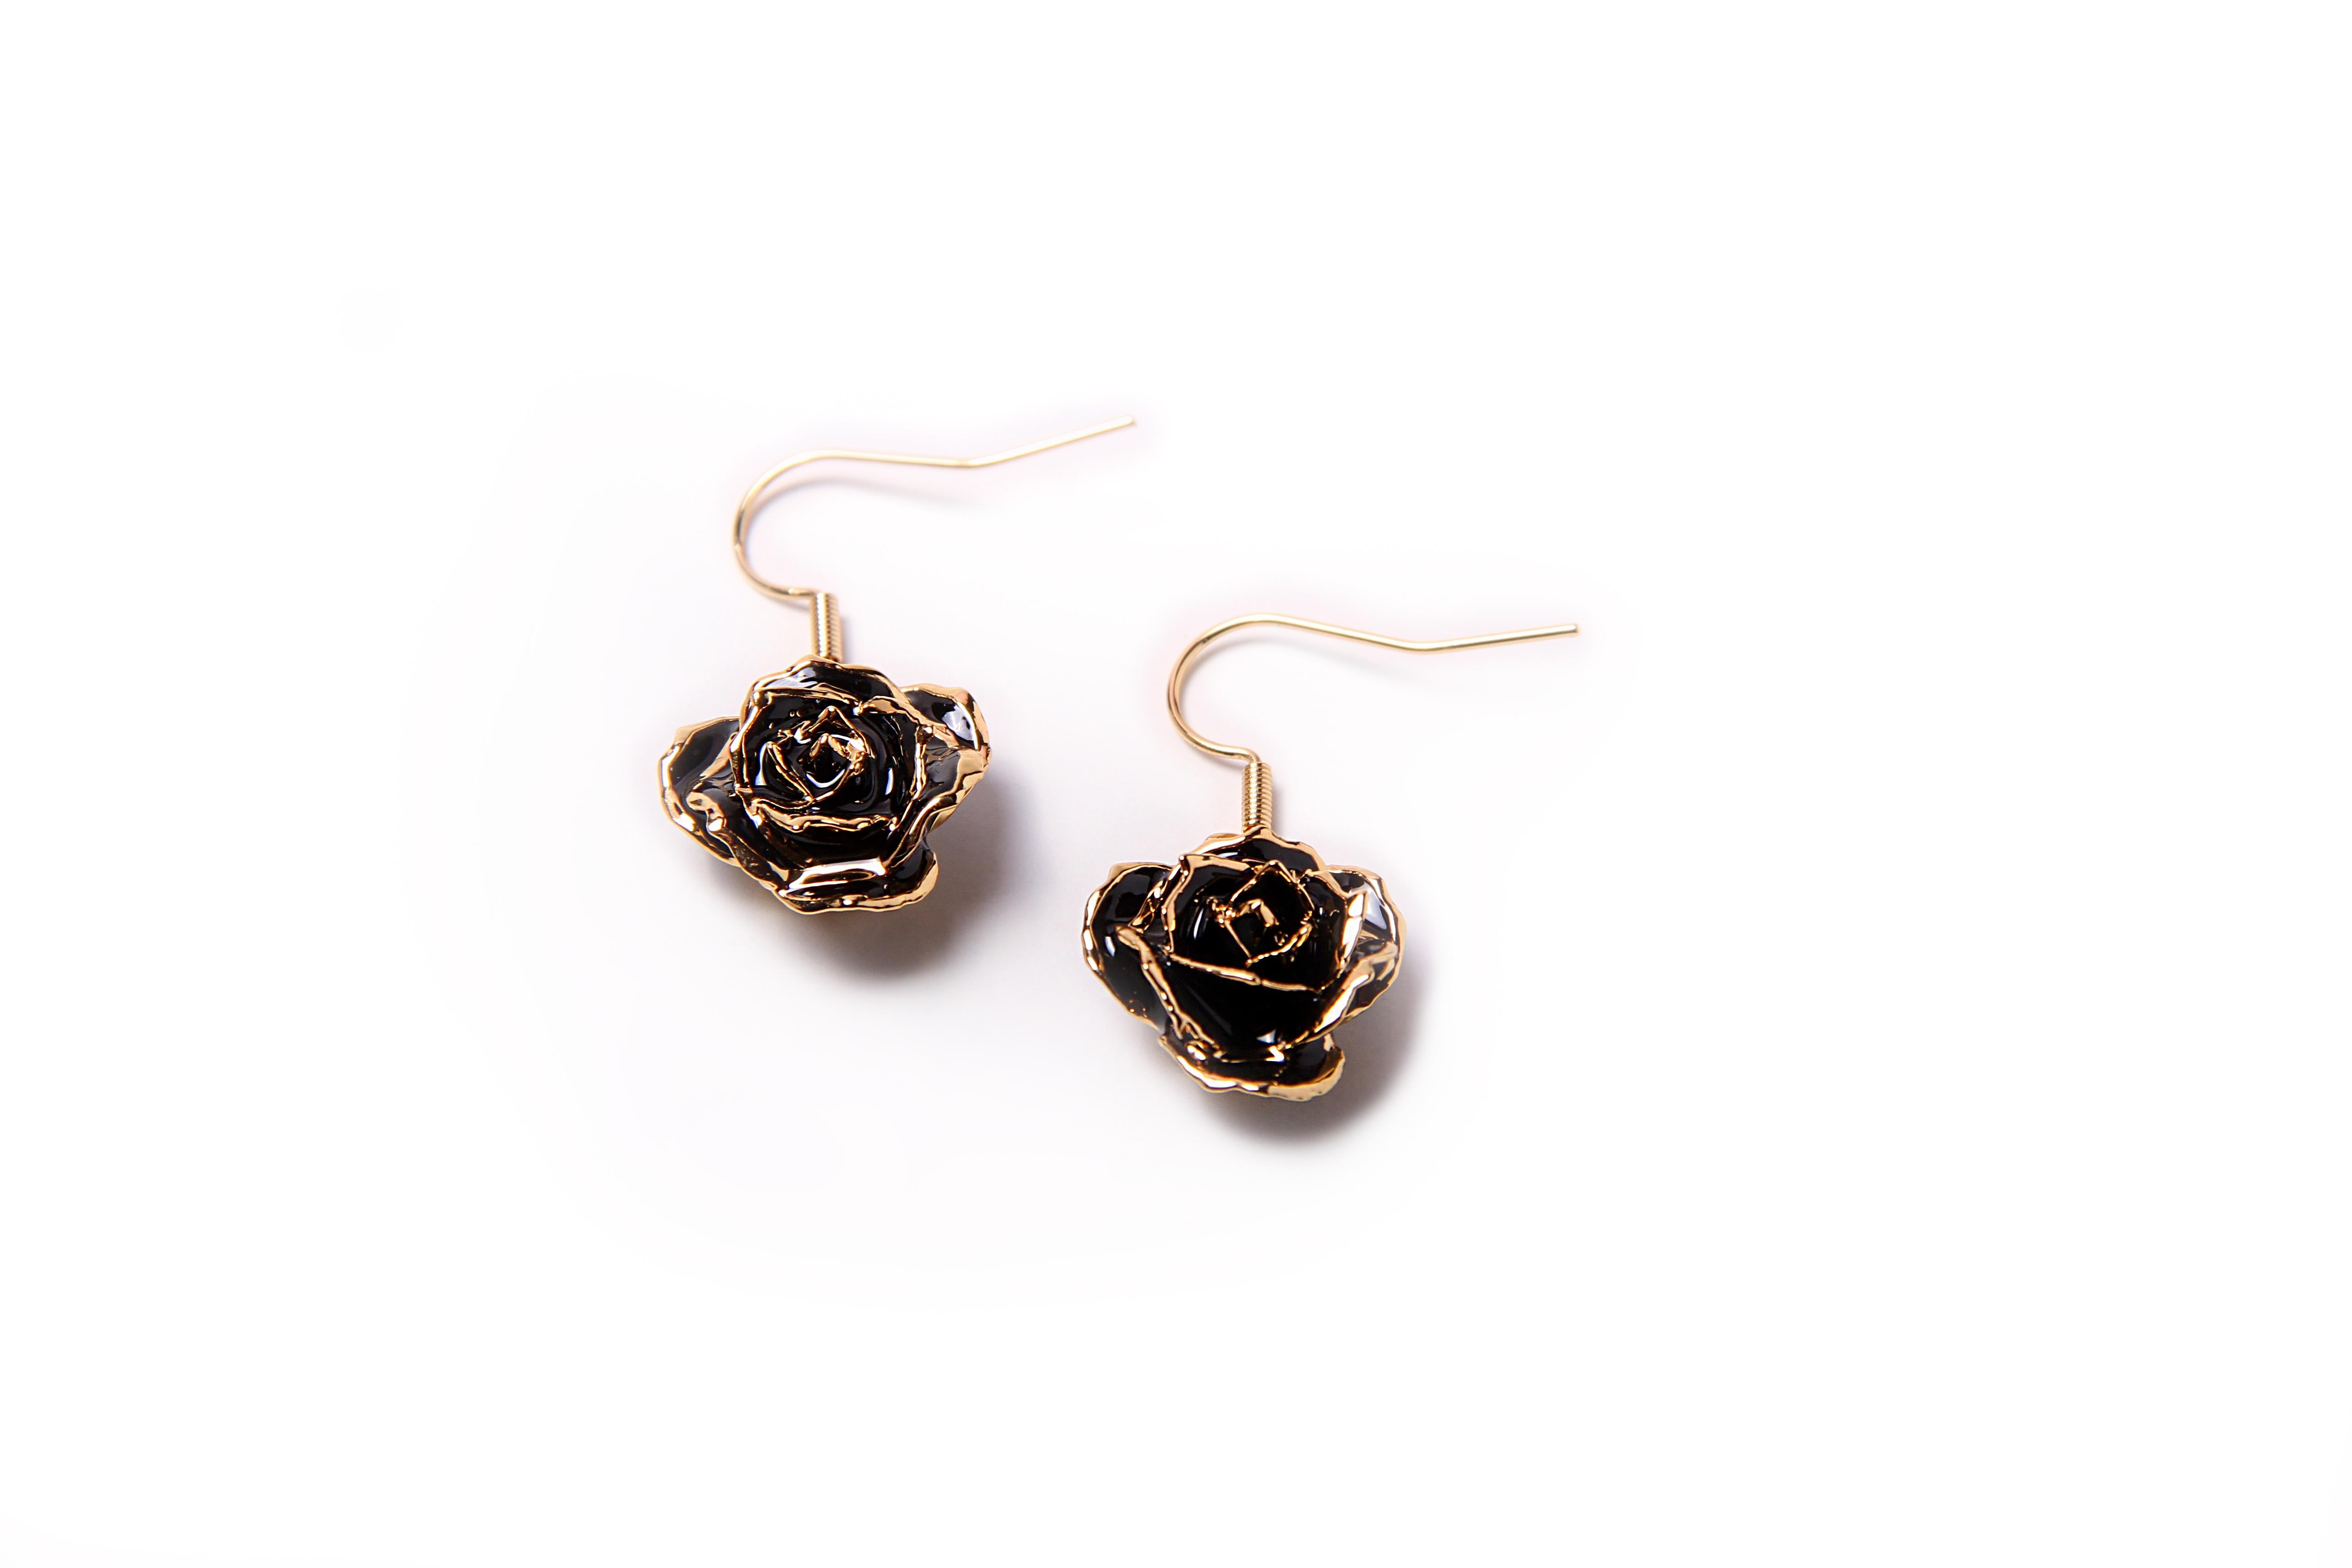 The suitable earrings can add that finishing touch to any style or look! Midnight Promise Eternal Earrings are great for accessorizing with any ensemble, no matter the season. They go well with most necklaces and dress styles, and look and feel